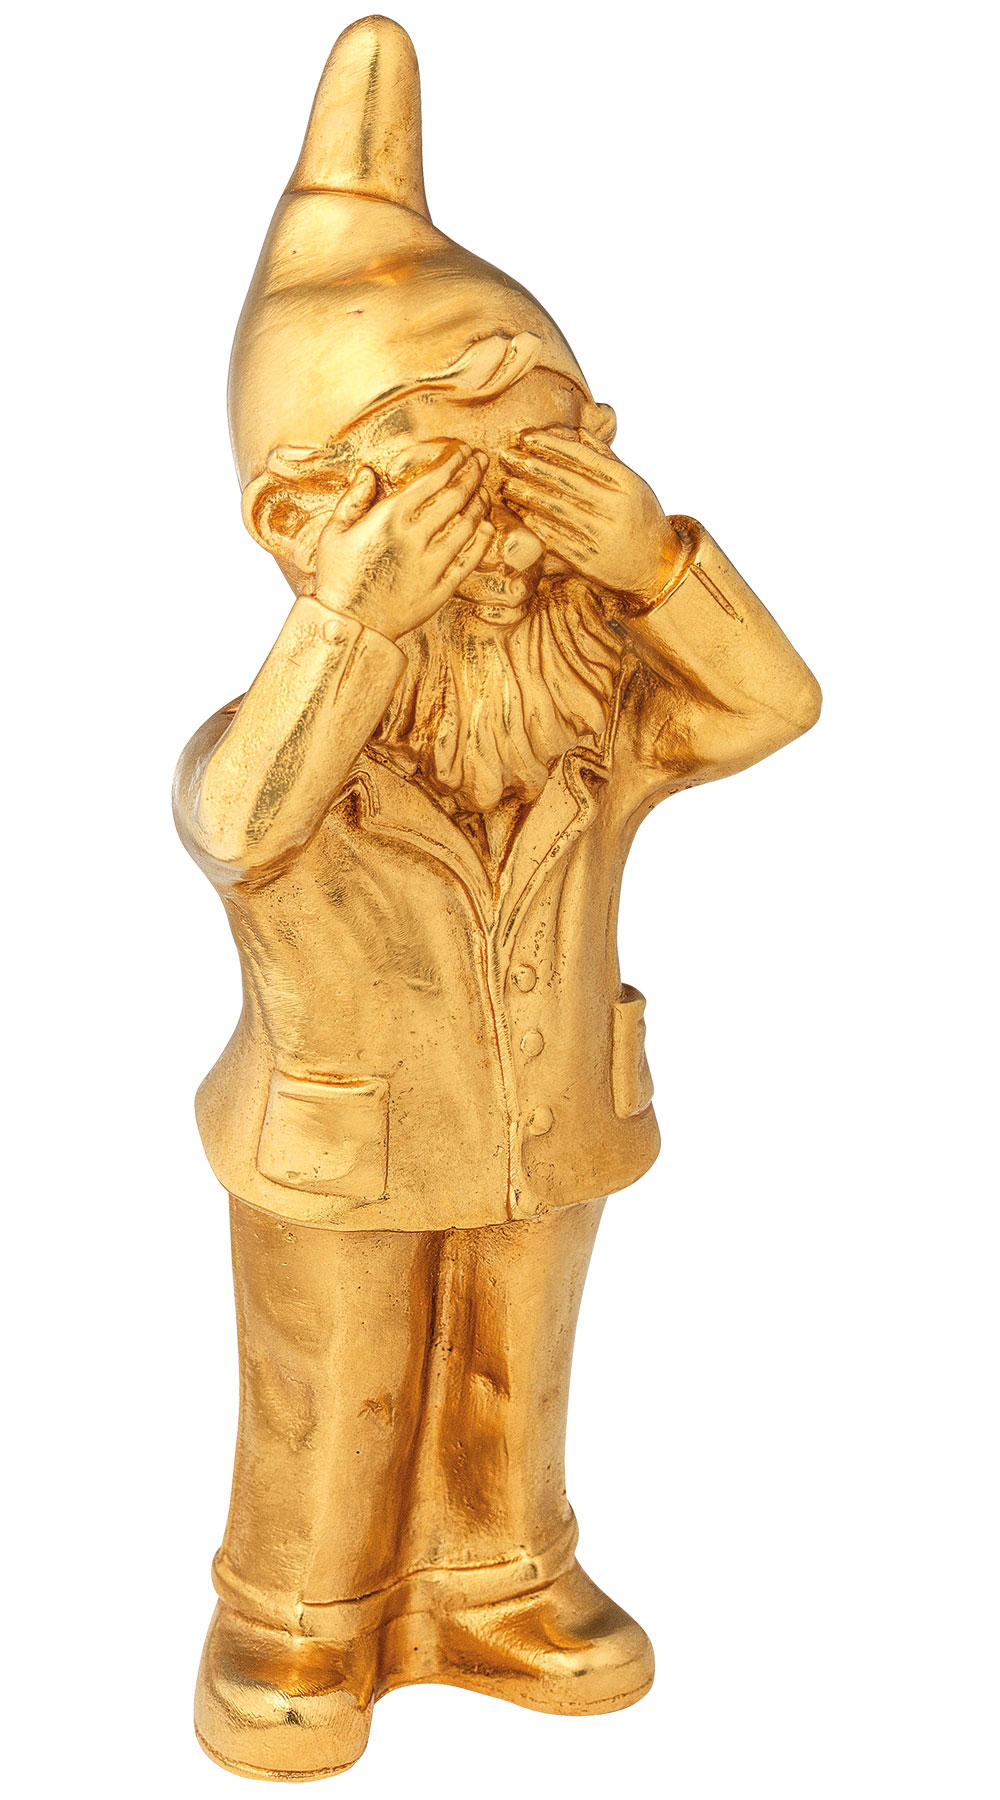 Sculpture "Bearer of Secrets - See Nothing", gold-plated version by Ottmar Hörl